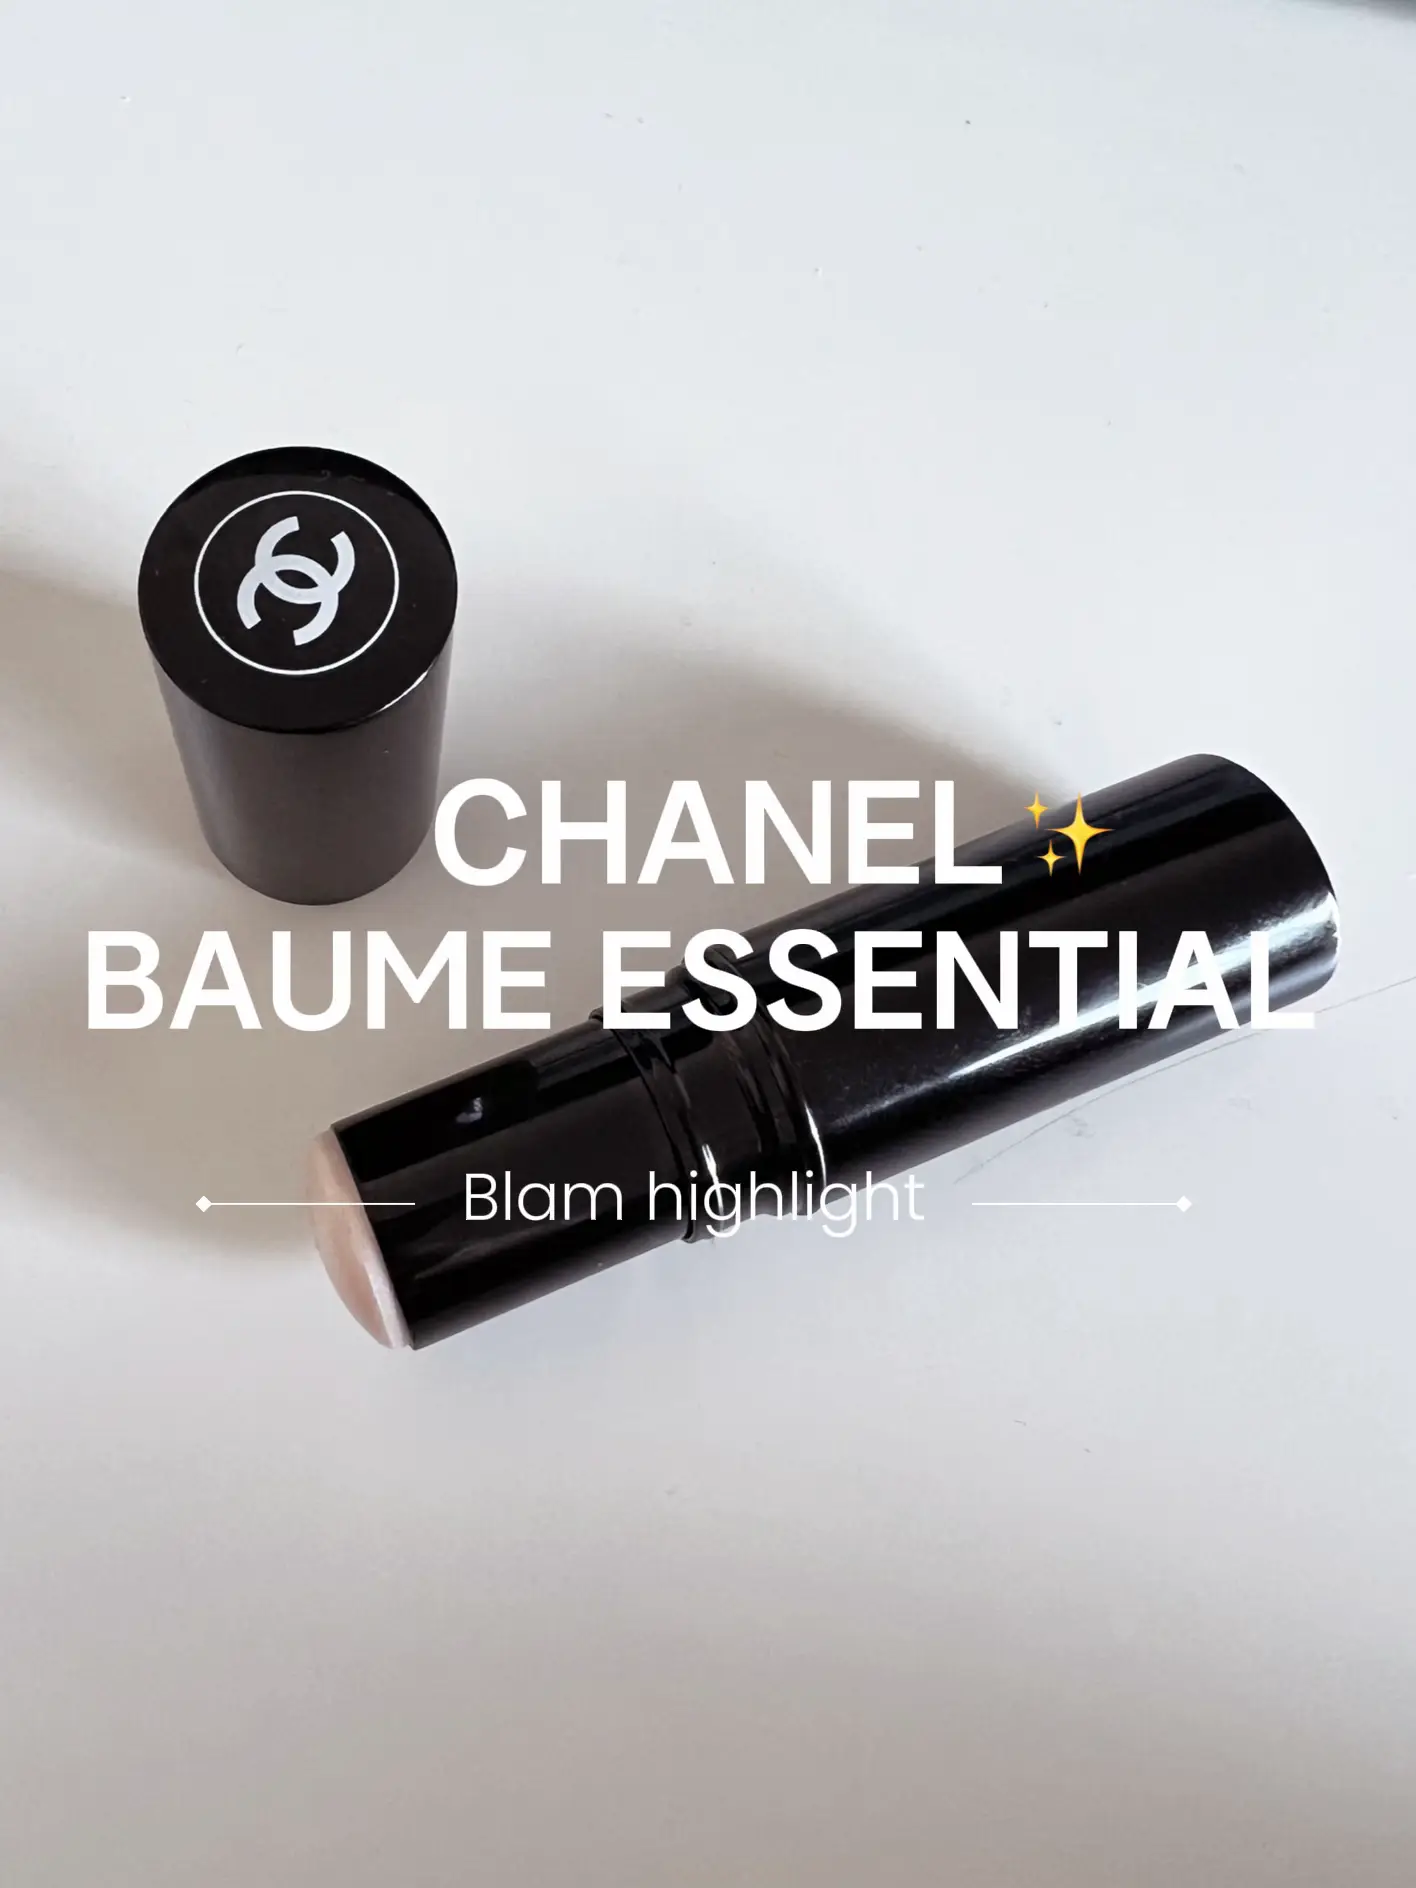 CHANEL BAUME ESSENTIAL ( blam highlight ) ✨, Gallery posted by  Wineisfine🍇